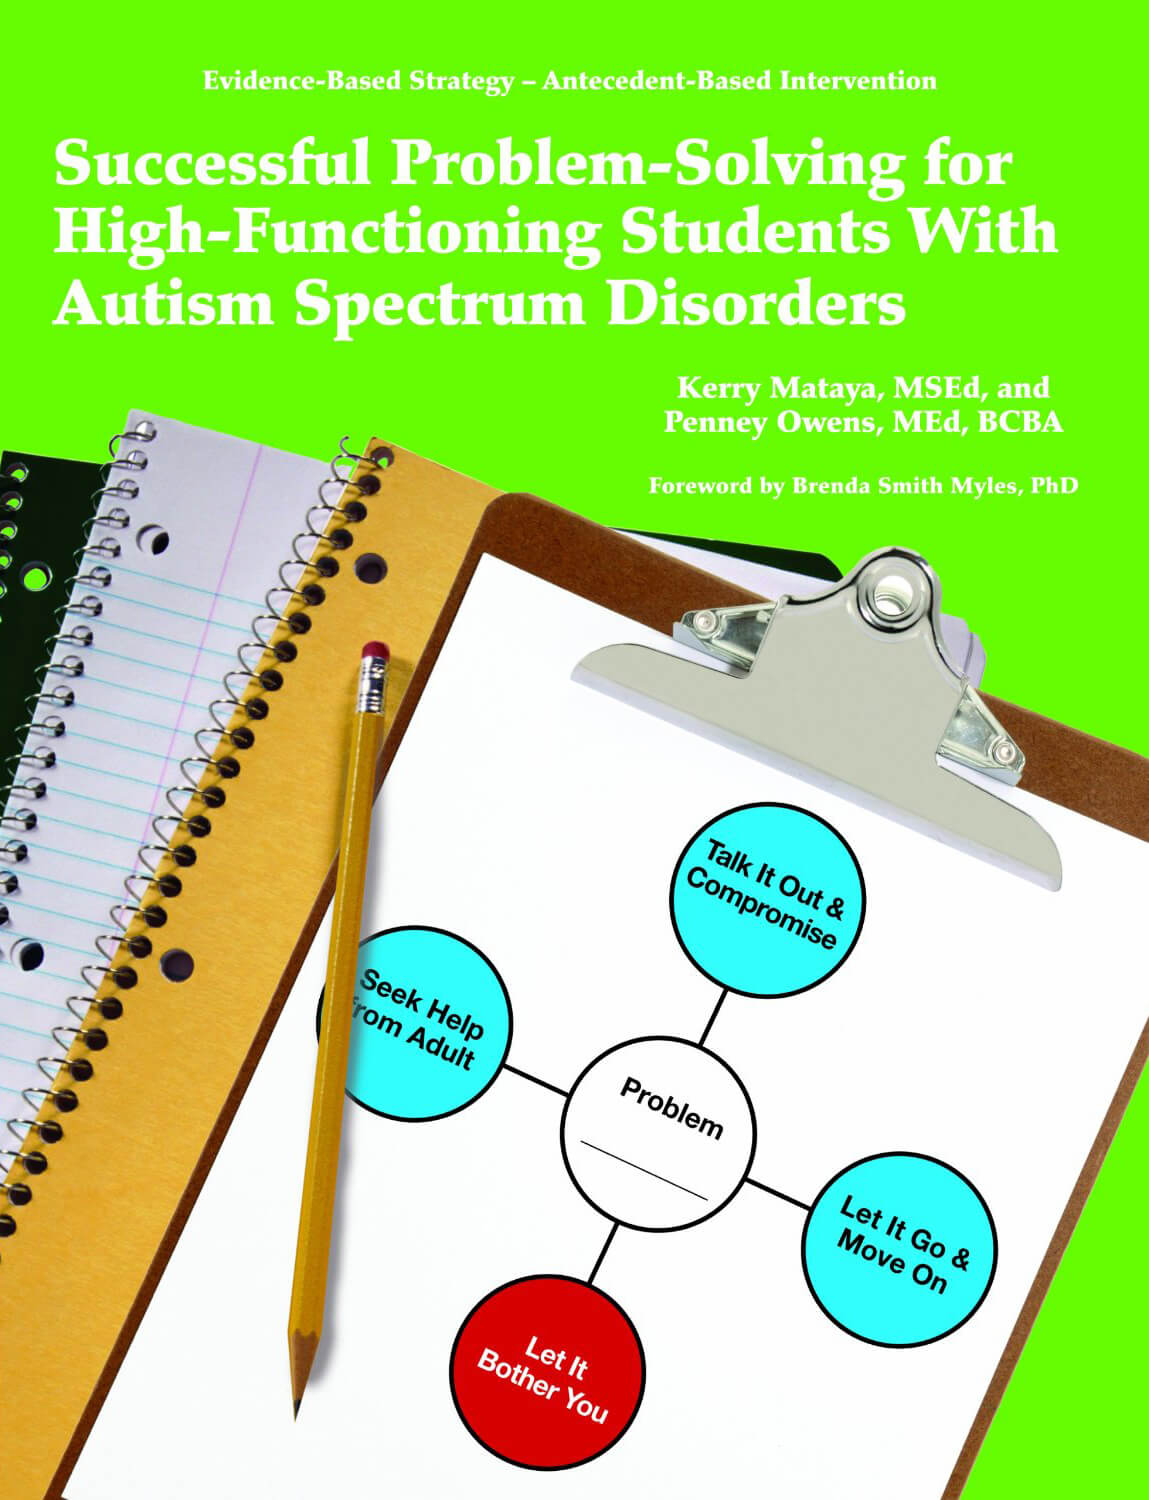 Successful Problem-Solving for High-Functioning Students with Autism Spectrum Disorders